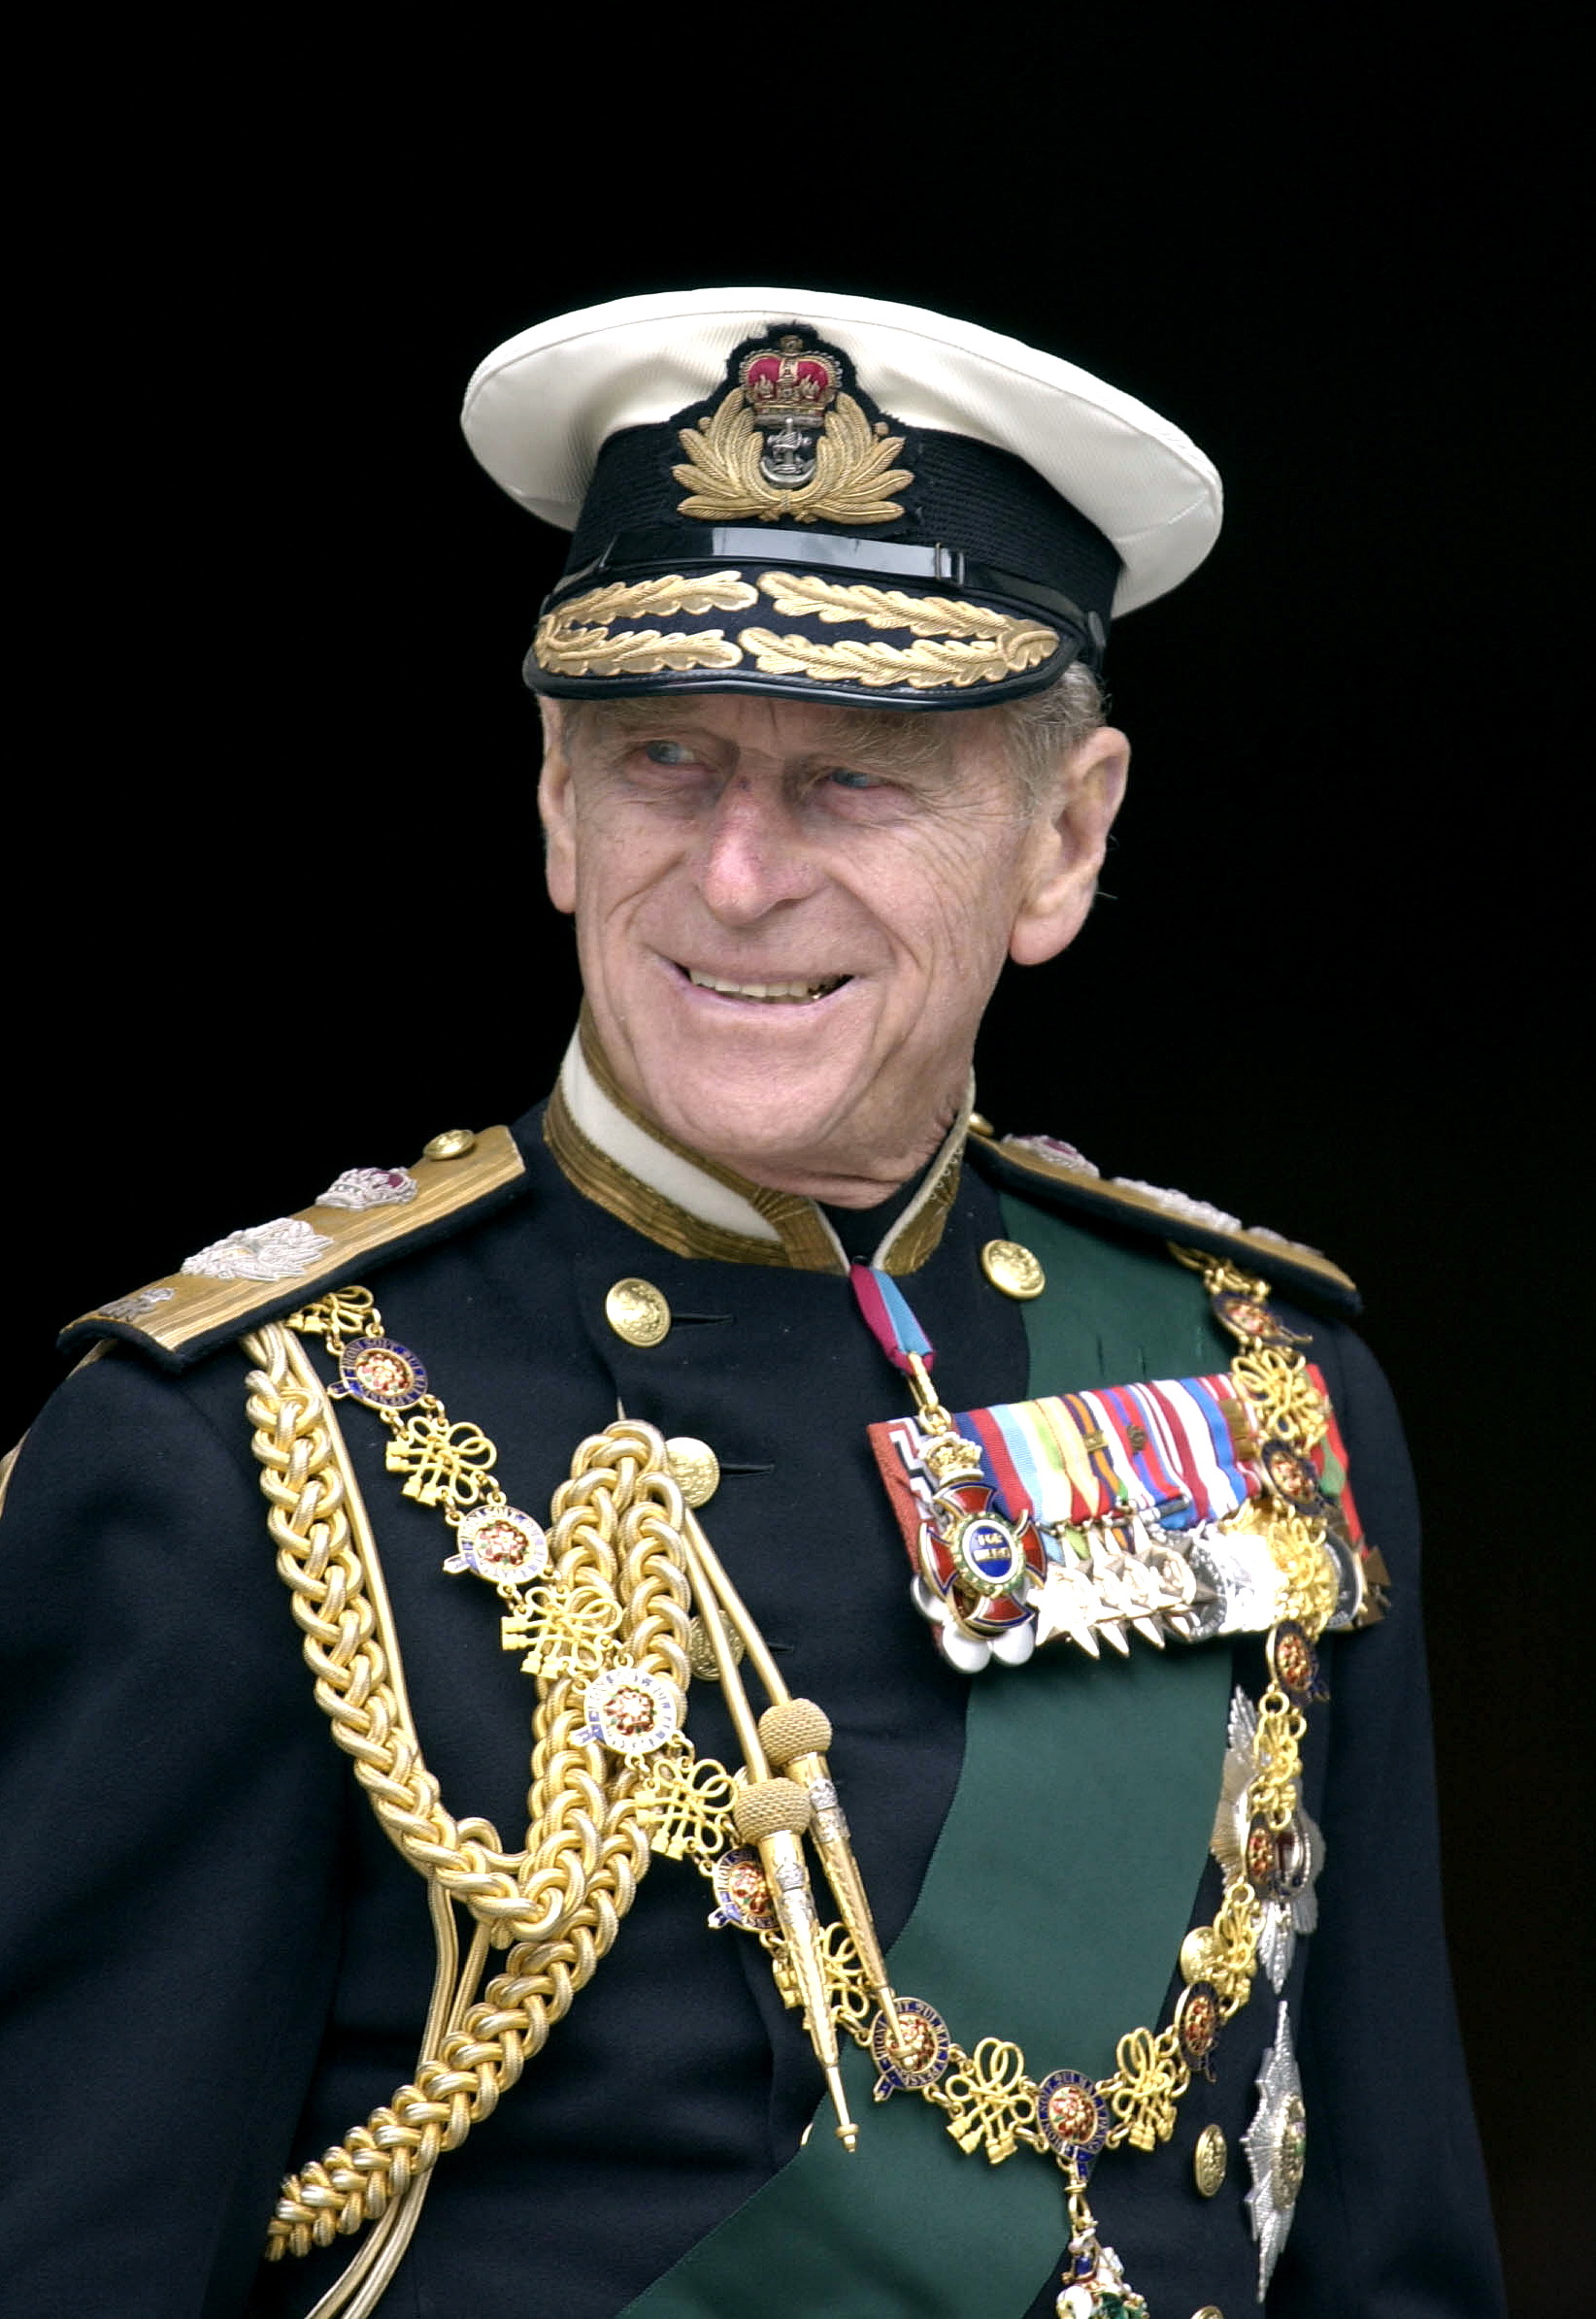 PHOTO: Prince Philip In Naval Uniform With Medals At St. Paul's Cathedral On The Day Of The Service To Mark The Golden Jubilee - The 50th Anniversary Of The Monarch's Reign, June 4, 2002.